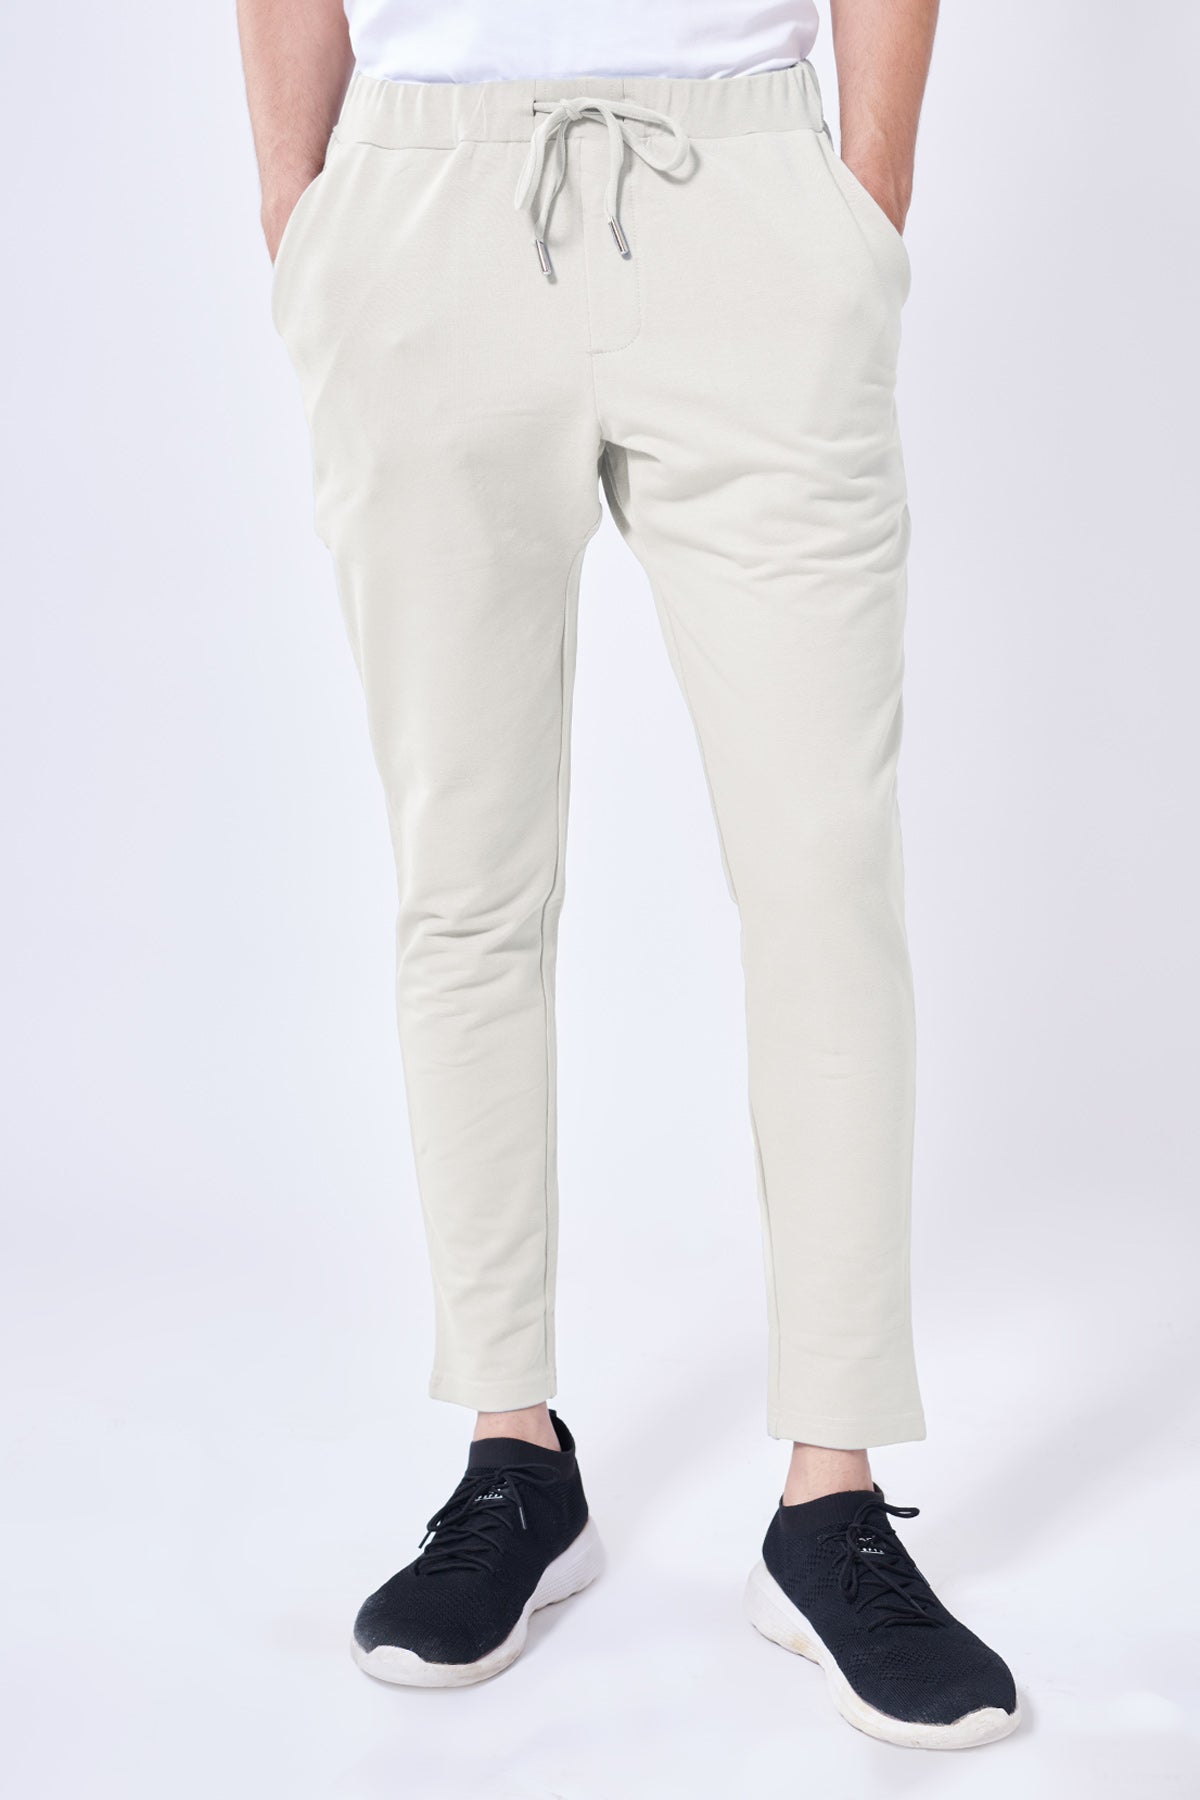 Easy Smoke White Sweatpant Beyours Essentials Private Limited